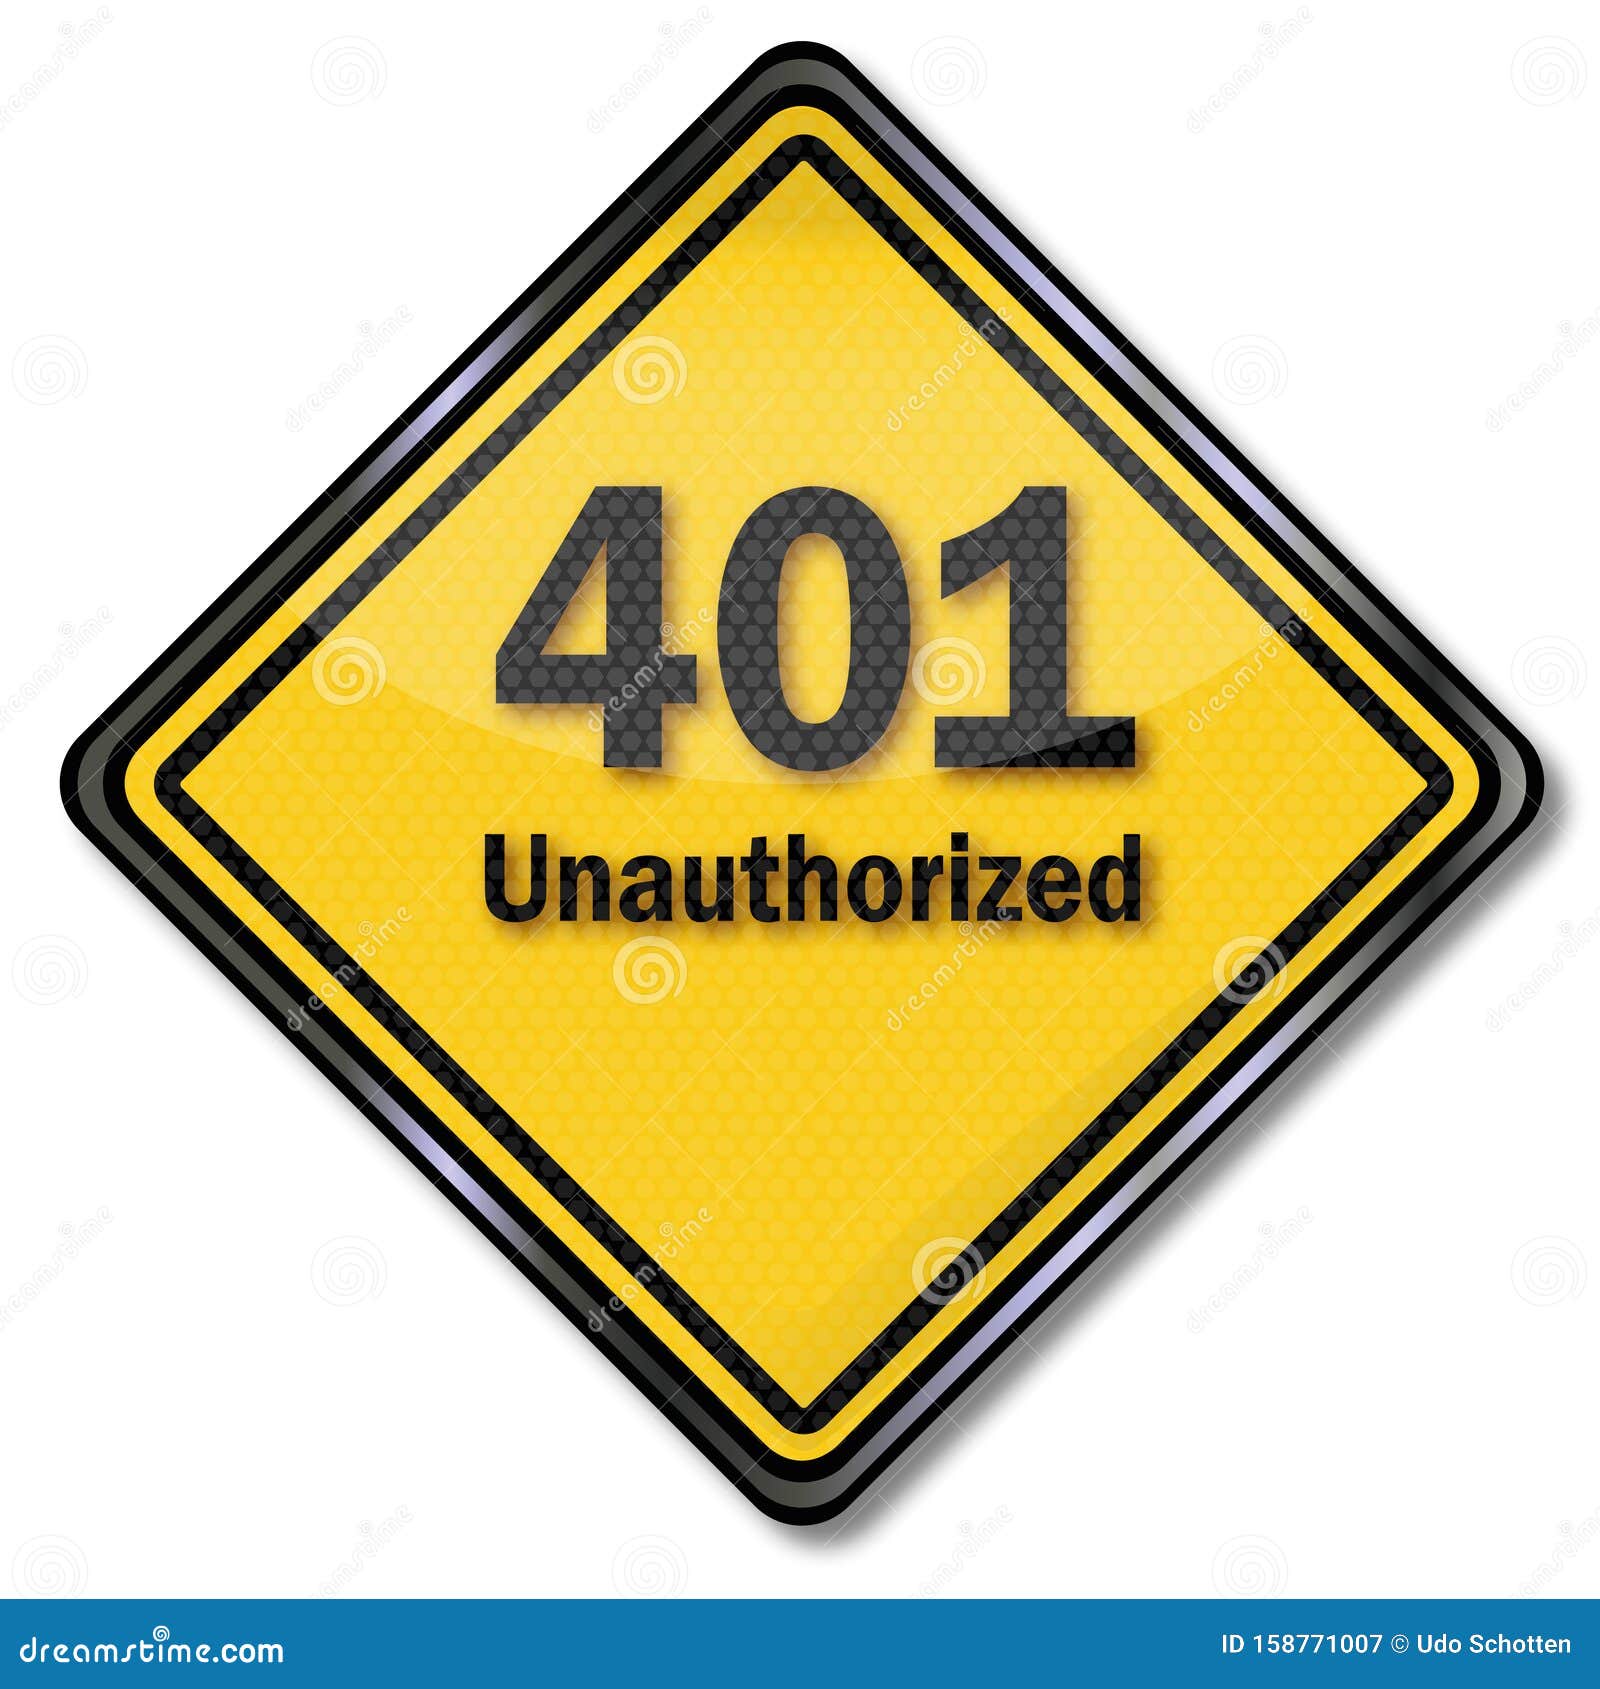 computer sign computer plate 401 unauthorized